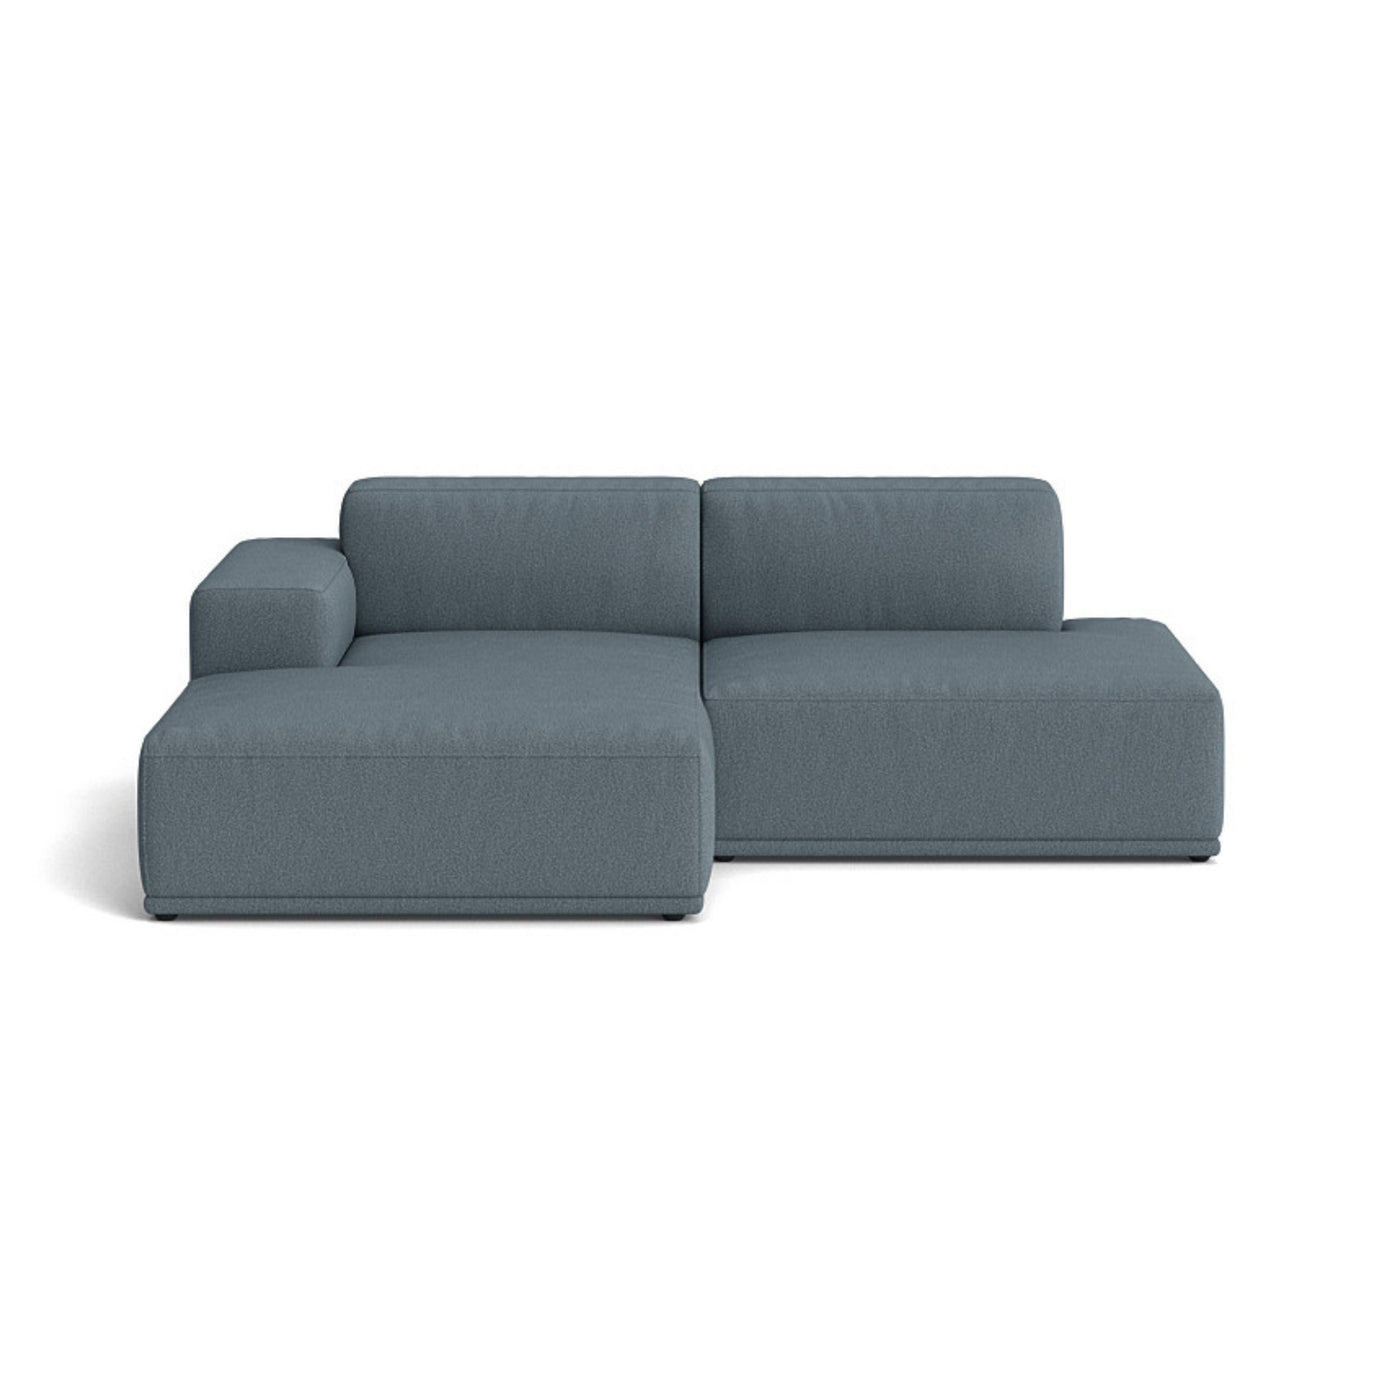 Muuto Connect Soft Modular 2 Seater Sofa, configuration 3. made-to-order from someday designs. #colour_clay-1-blue